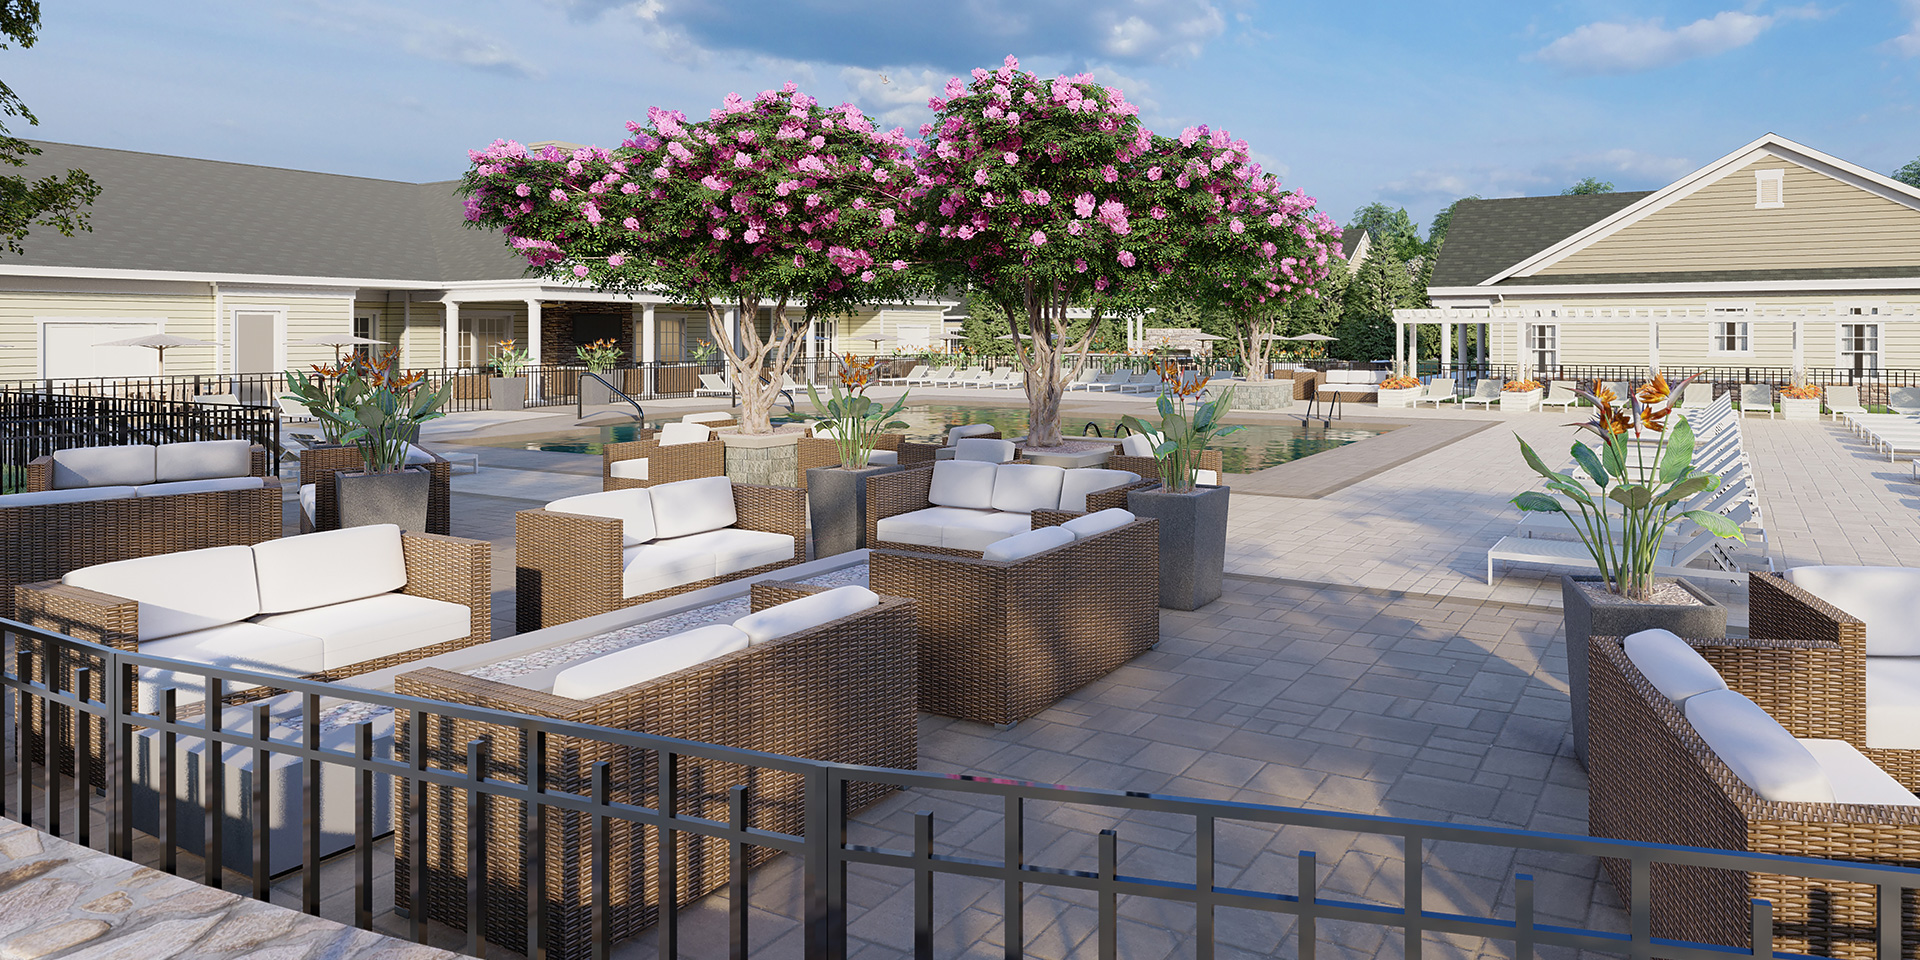 The Grand Patio is the ultimate destination for residents, equipped with comfortable lounge chairs, shaded sitting areas, a resort-style heated pool, Poolside bar, outdoor TV, grilling stations, and a firepit.